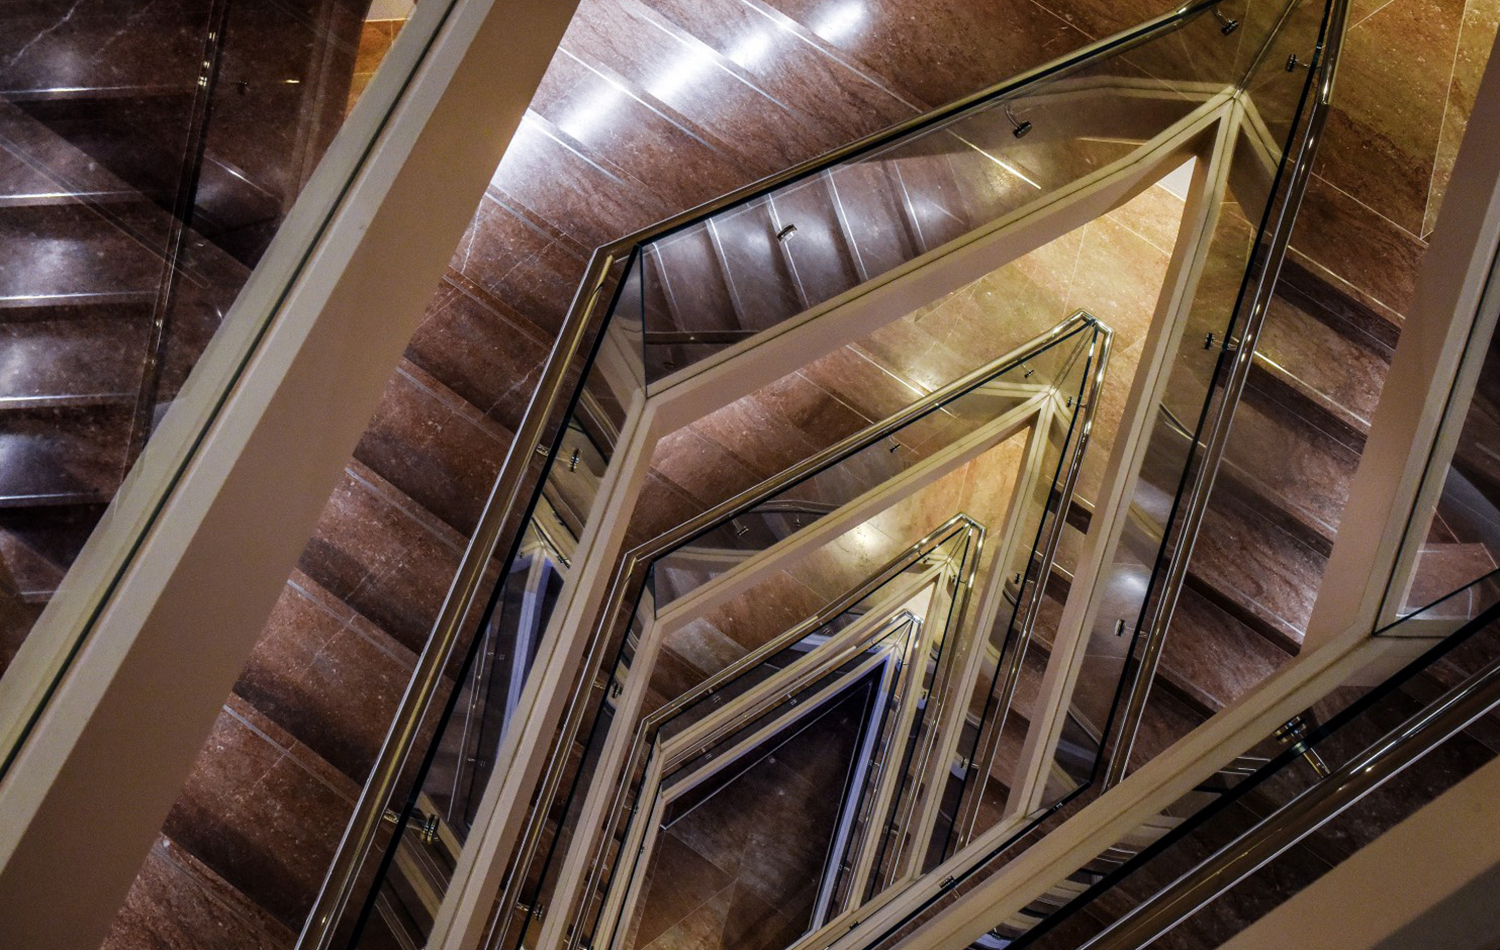  A view of the new diagonal staircase in the National Gallery of Art’s East Building. (Bill O'Leary/The Washington Post) 